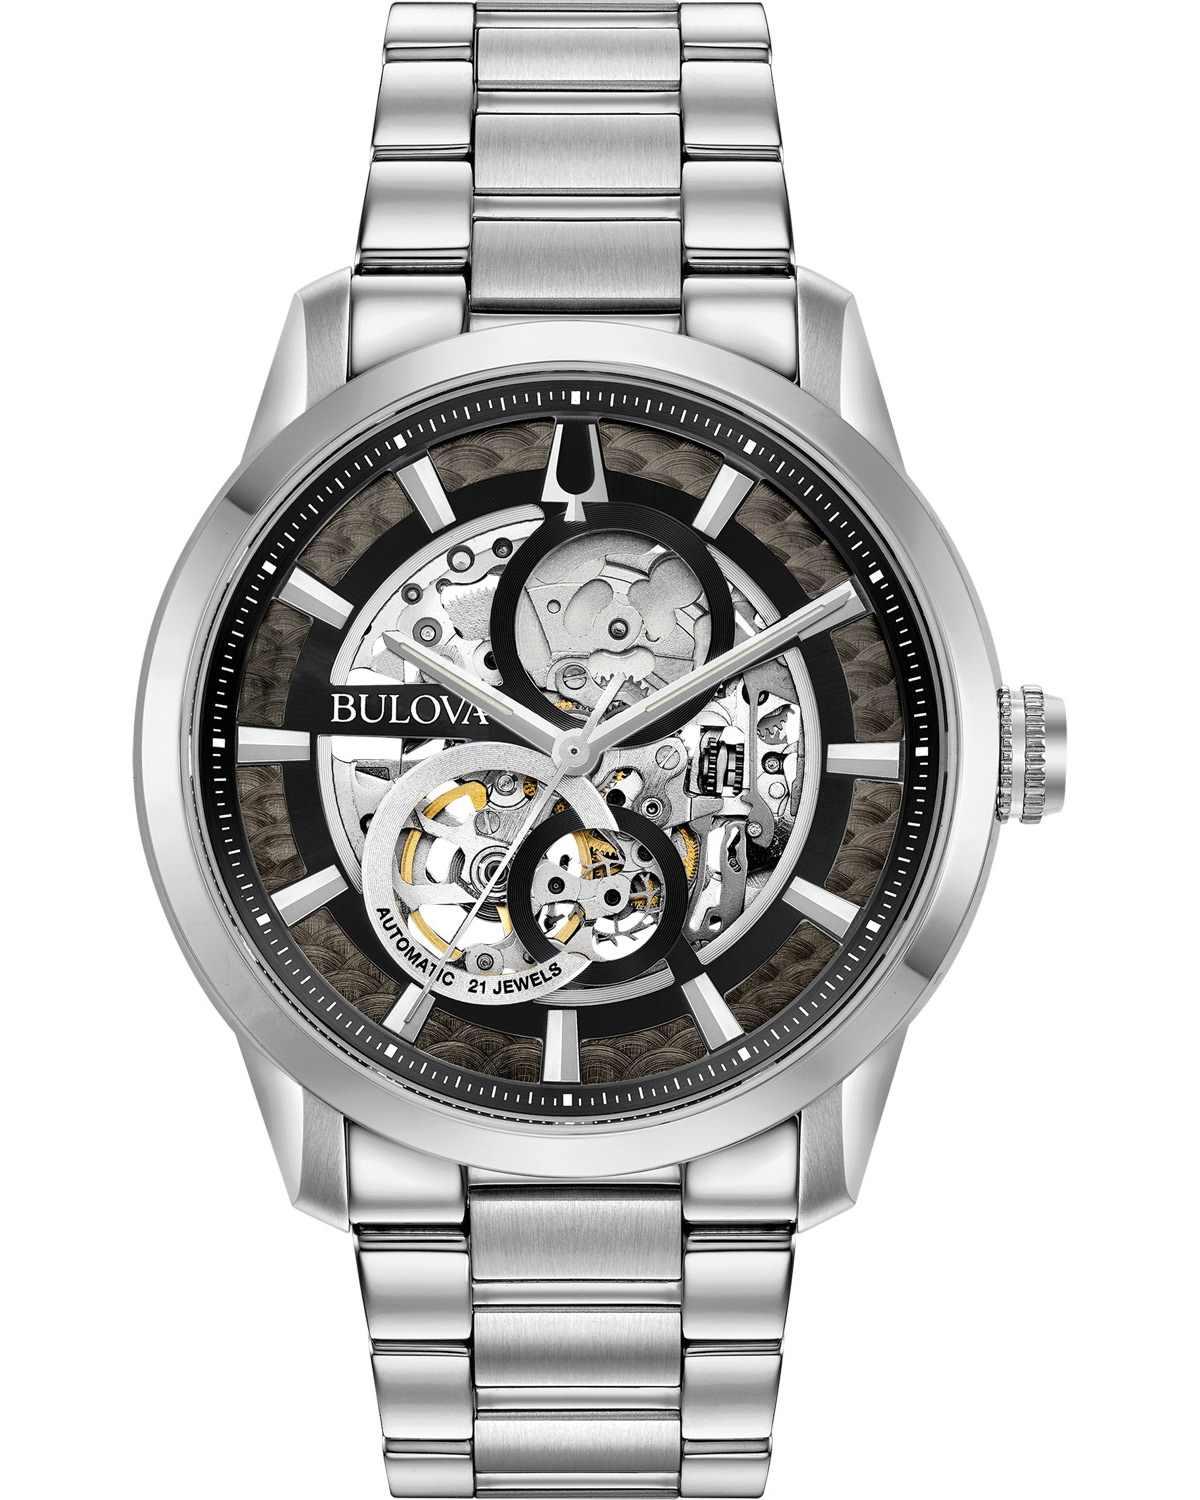 bulova sutton collection automatic skeleton 96a208 silver case with stainless steel bracelet image1 1